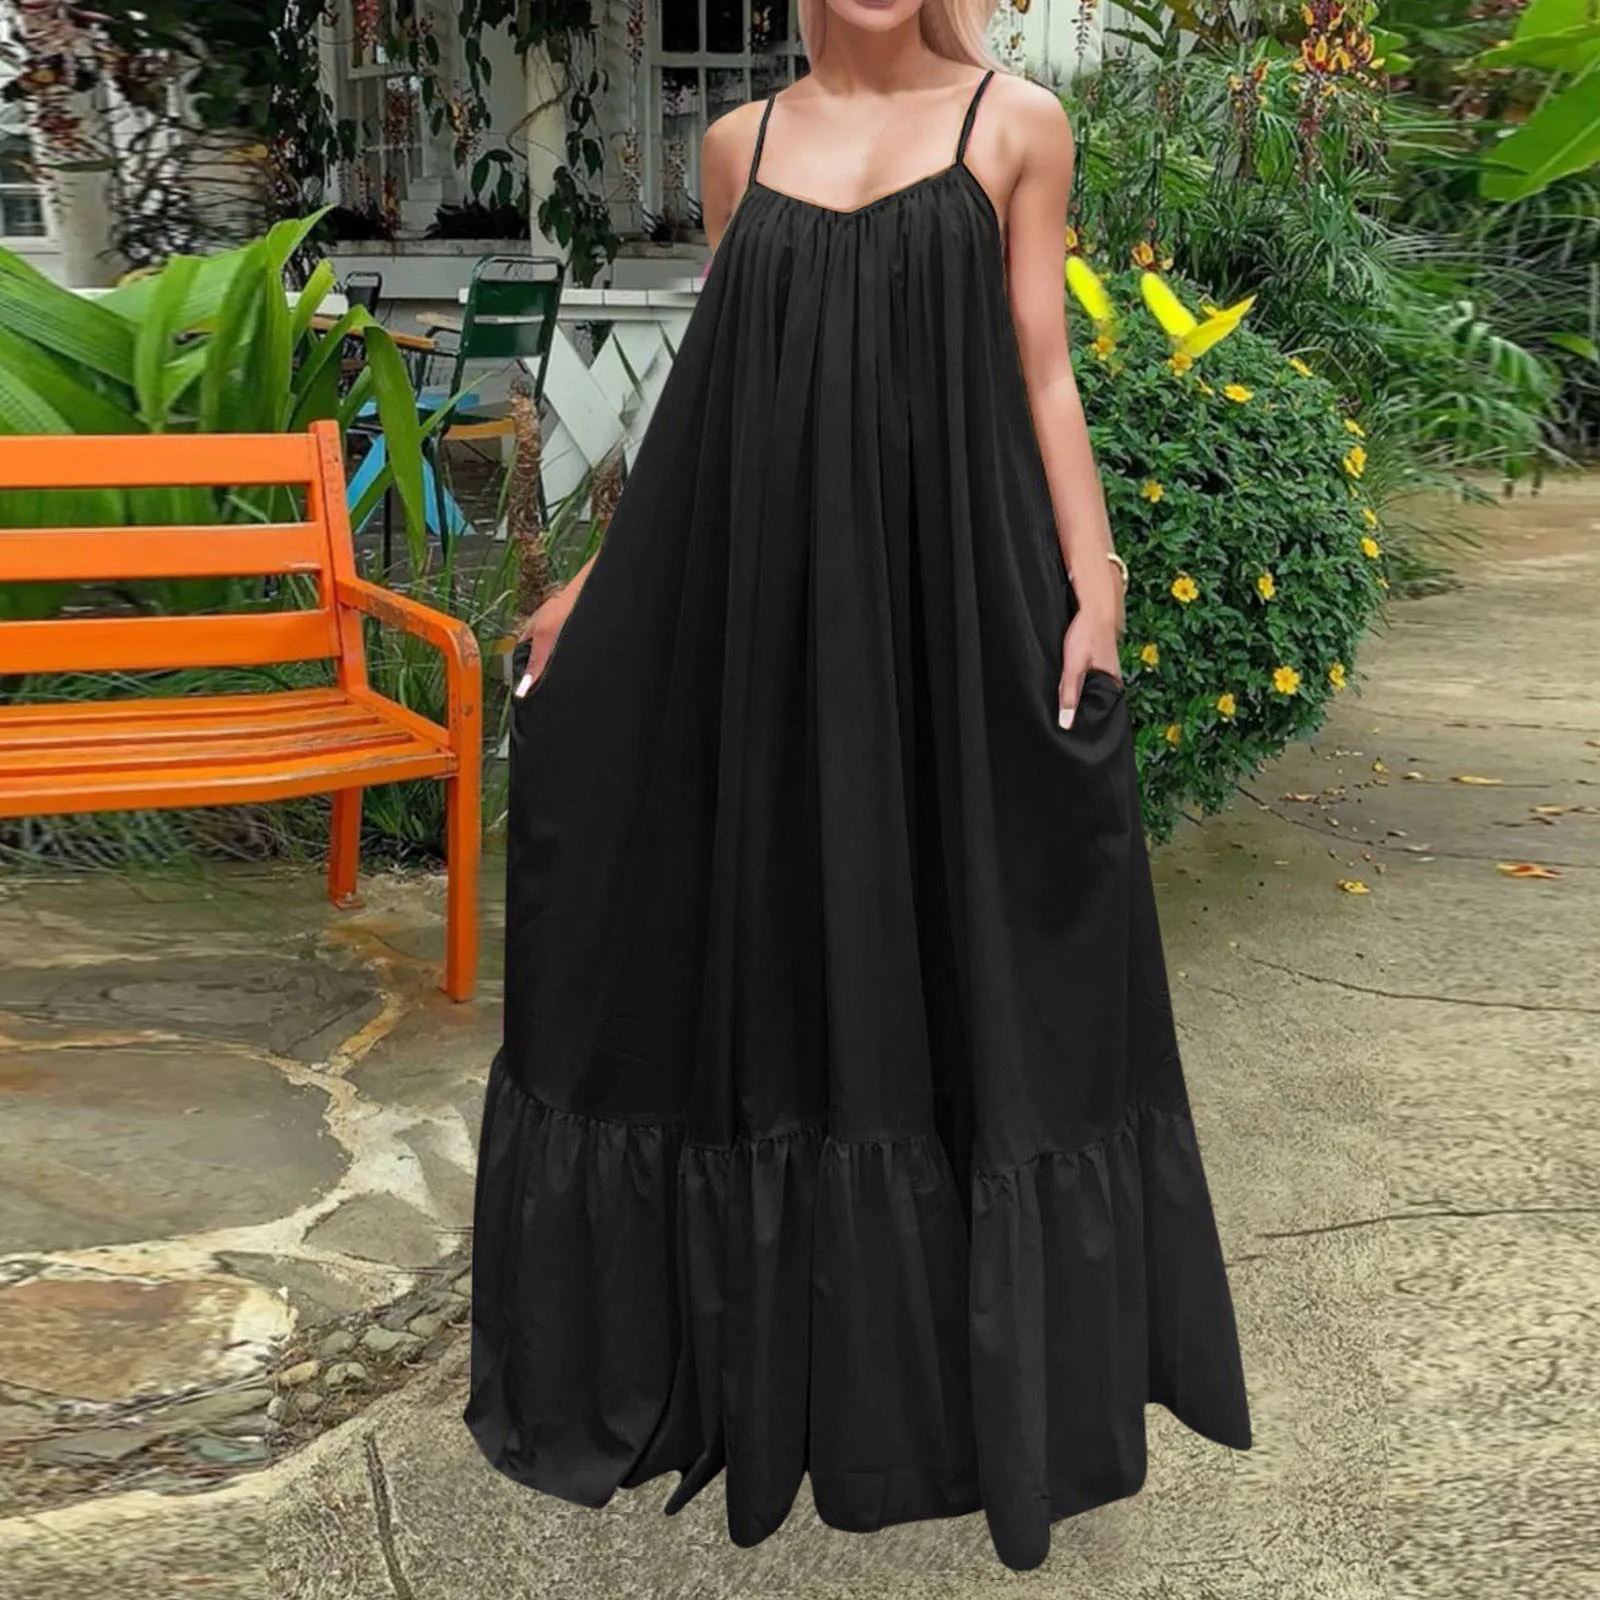 

Loose Fitting Ruffles Sling Long Maxi Dress Women’s Solid Color Casual Plus Size Dresses Pleated Sleeveless Fashion Dress